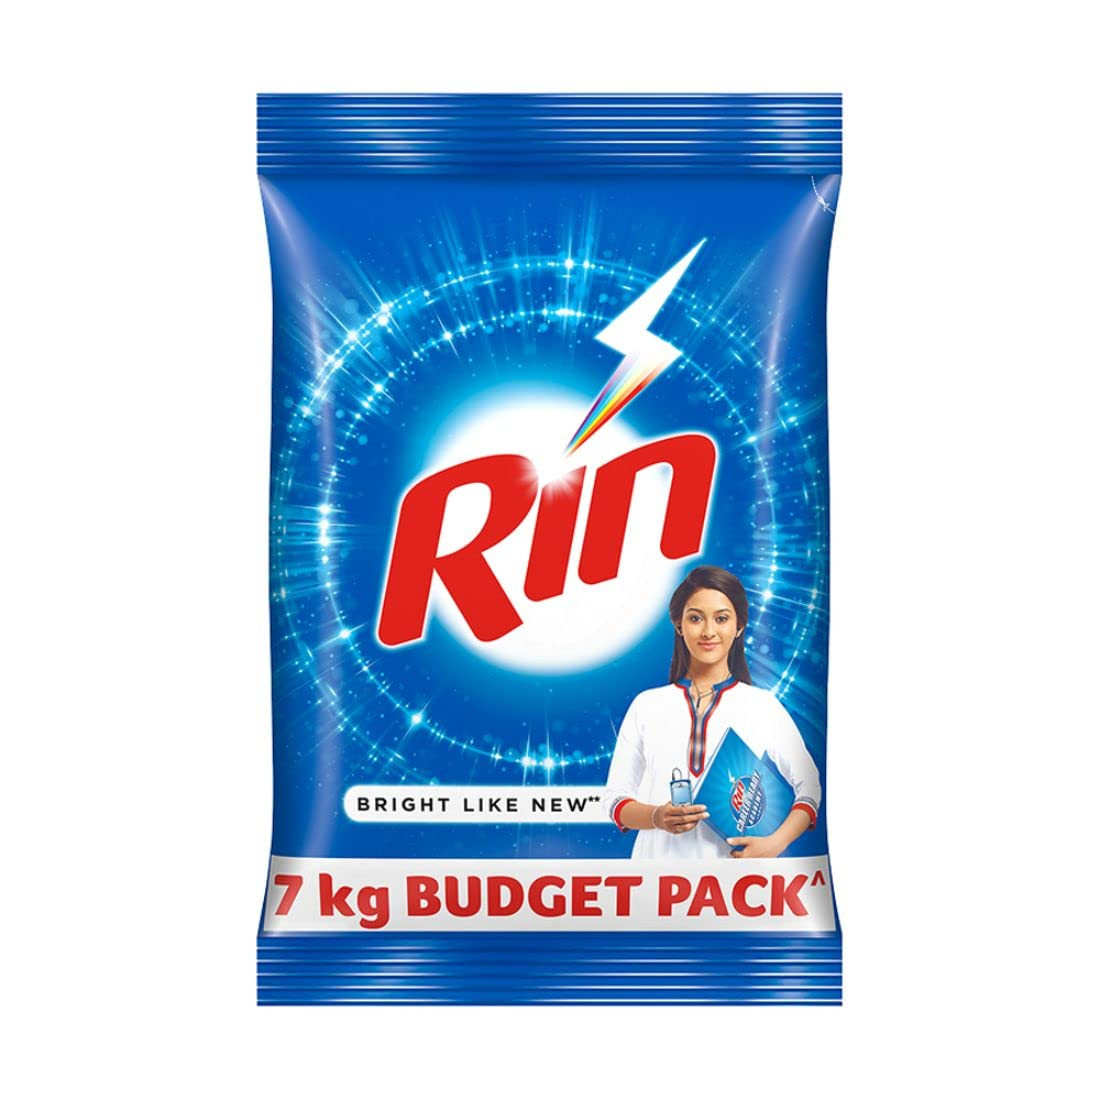 Rin Advanced Detergent Powder | 7 kg Pack | Laundry Detergent For Bright and Dazzling White Clothes